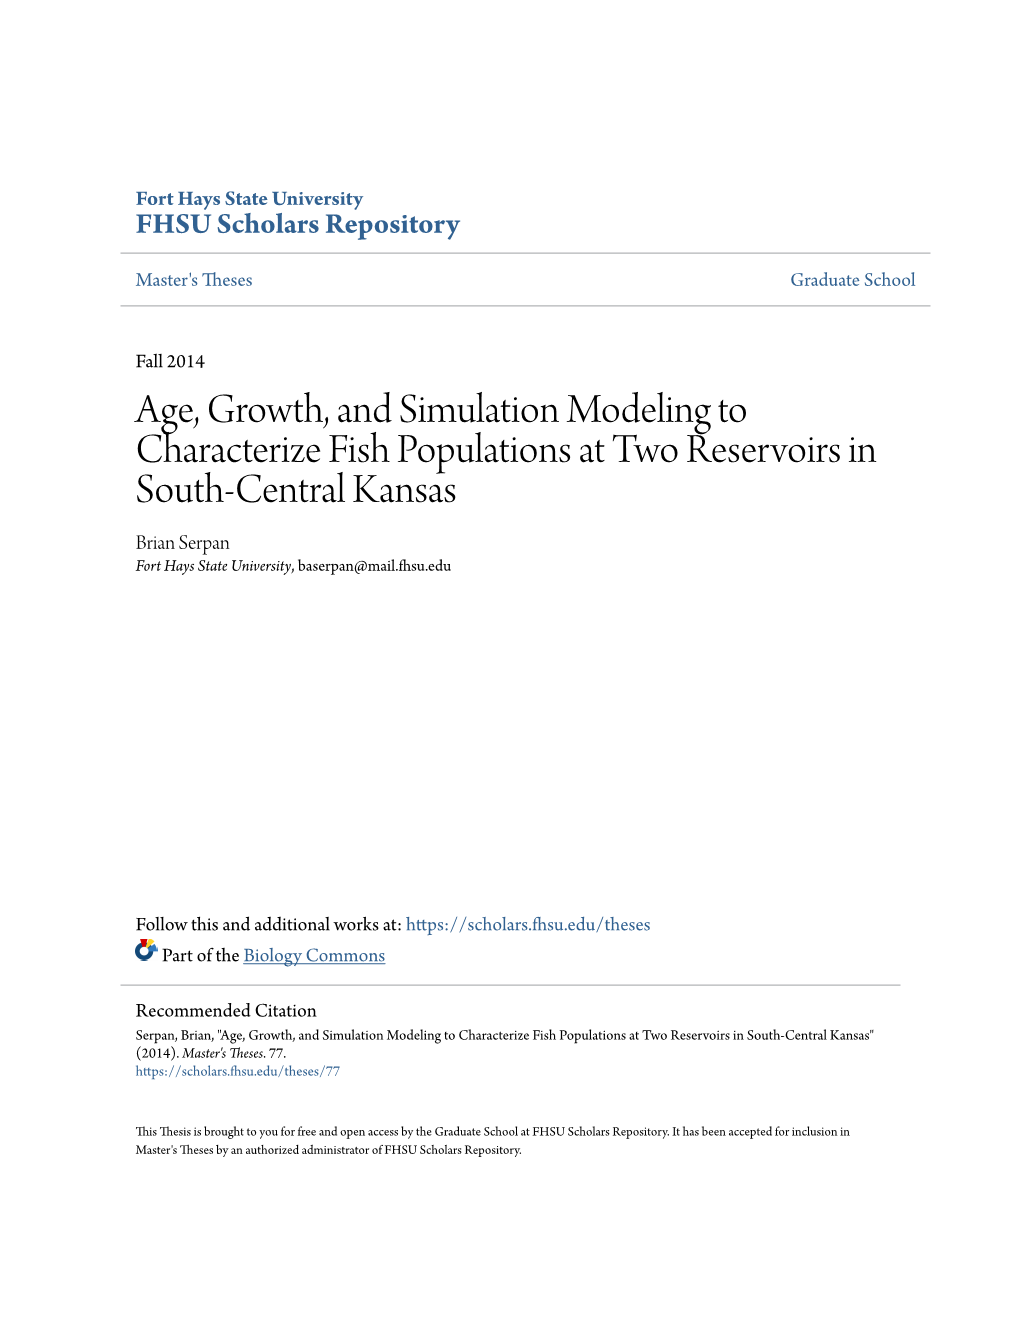 Age, Growth, and Simulation Modeling to Characterize Fish Populations at Two Reservoirs in South-Central Kansas